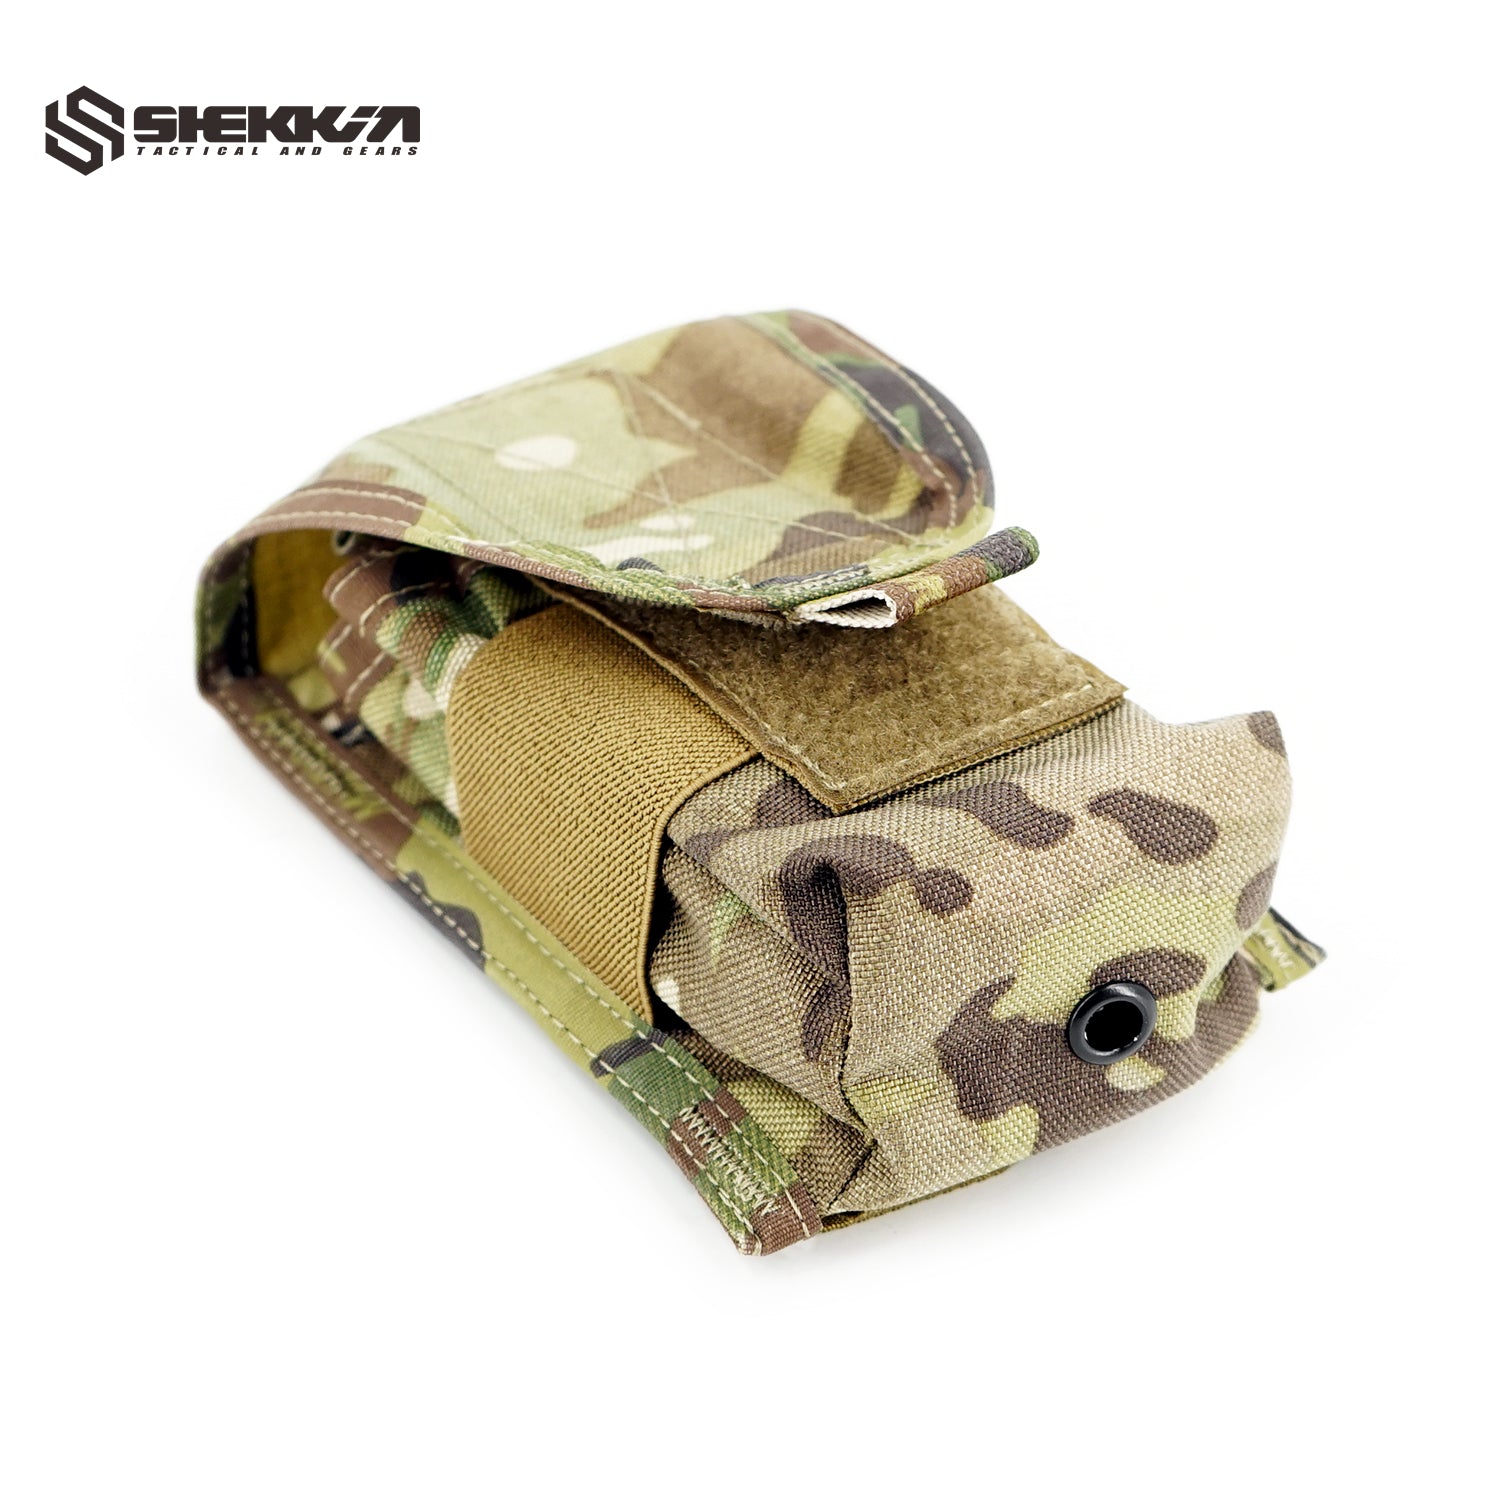 Multicam Paraclete style Tiered SR25 Mag Pouch - Shekkin Gears